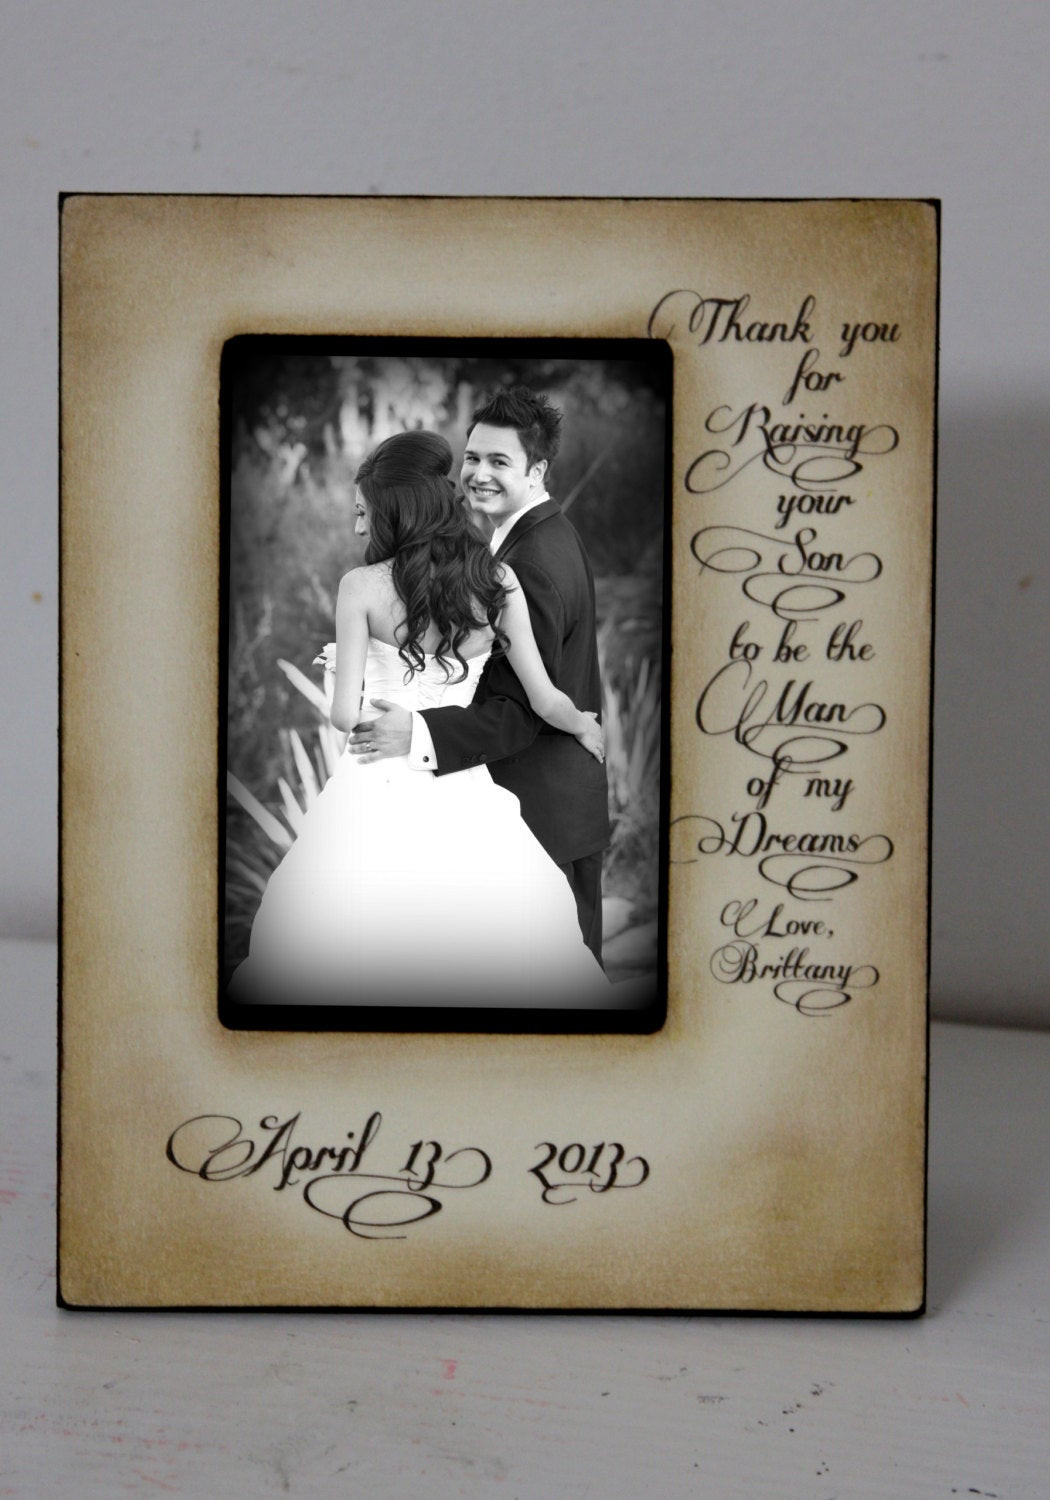 Wedding Gift Ideas For Son
 Wedding Sign Picture Frame Thank you for Raising your son to